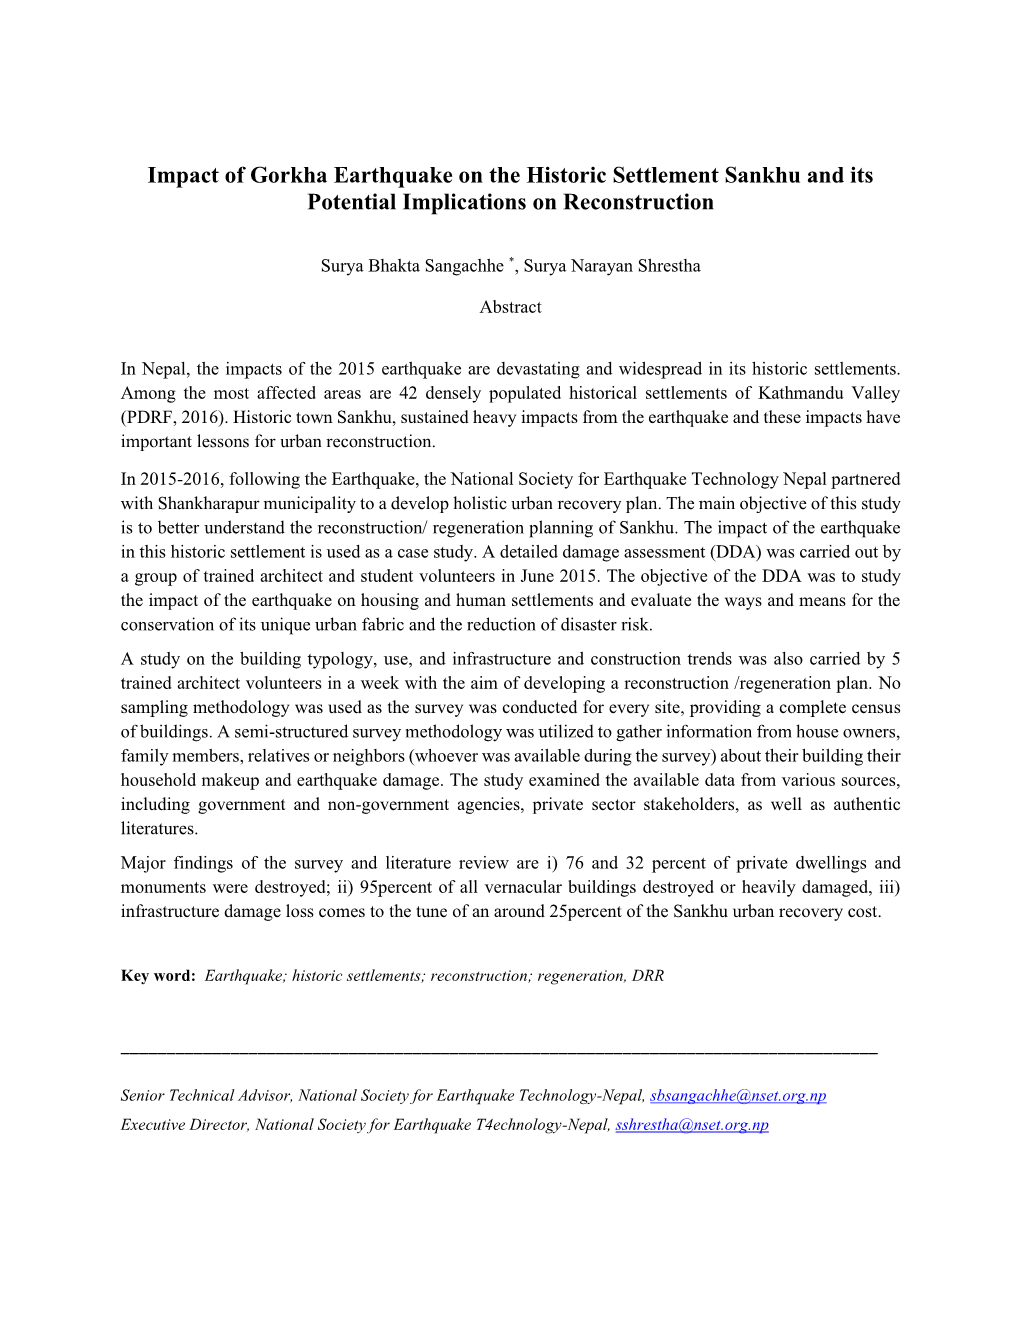 Impact of Gorkha Earthquake on the Historic Settlement Sankhu and Its Potential Implications on Reconstruction